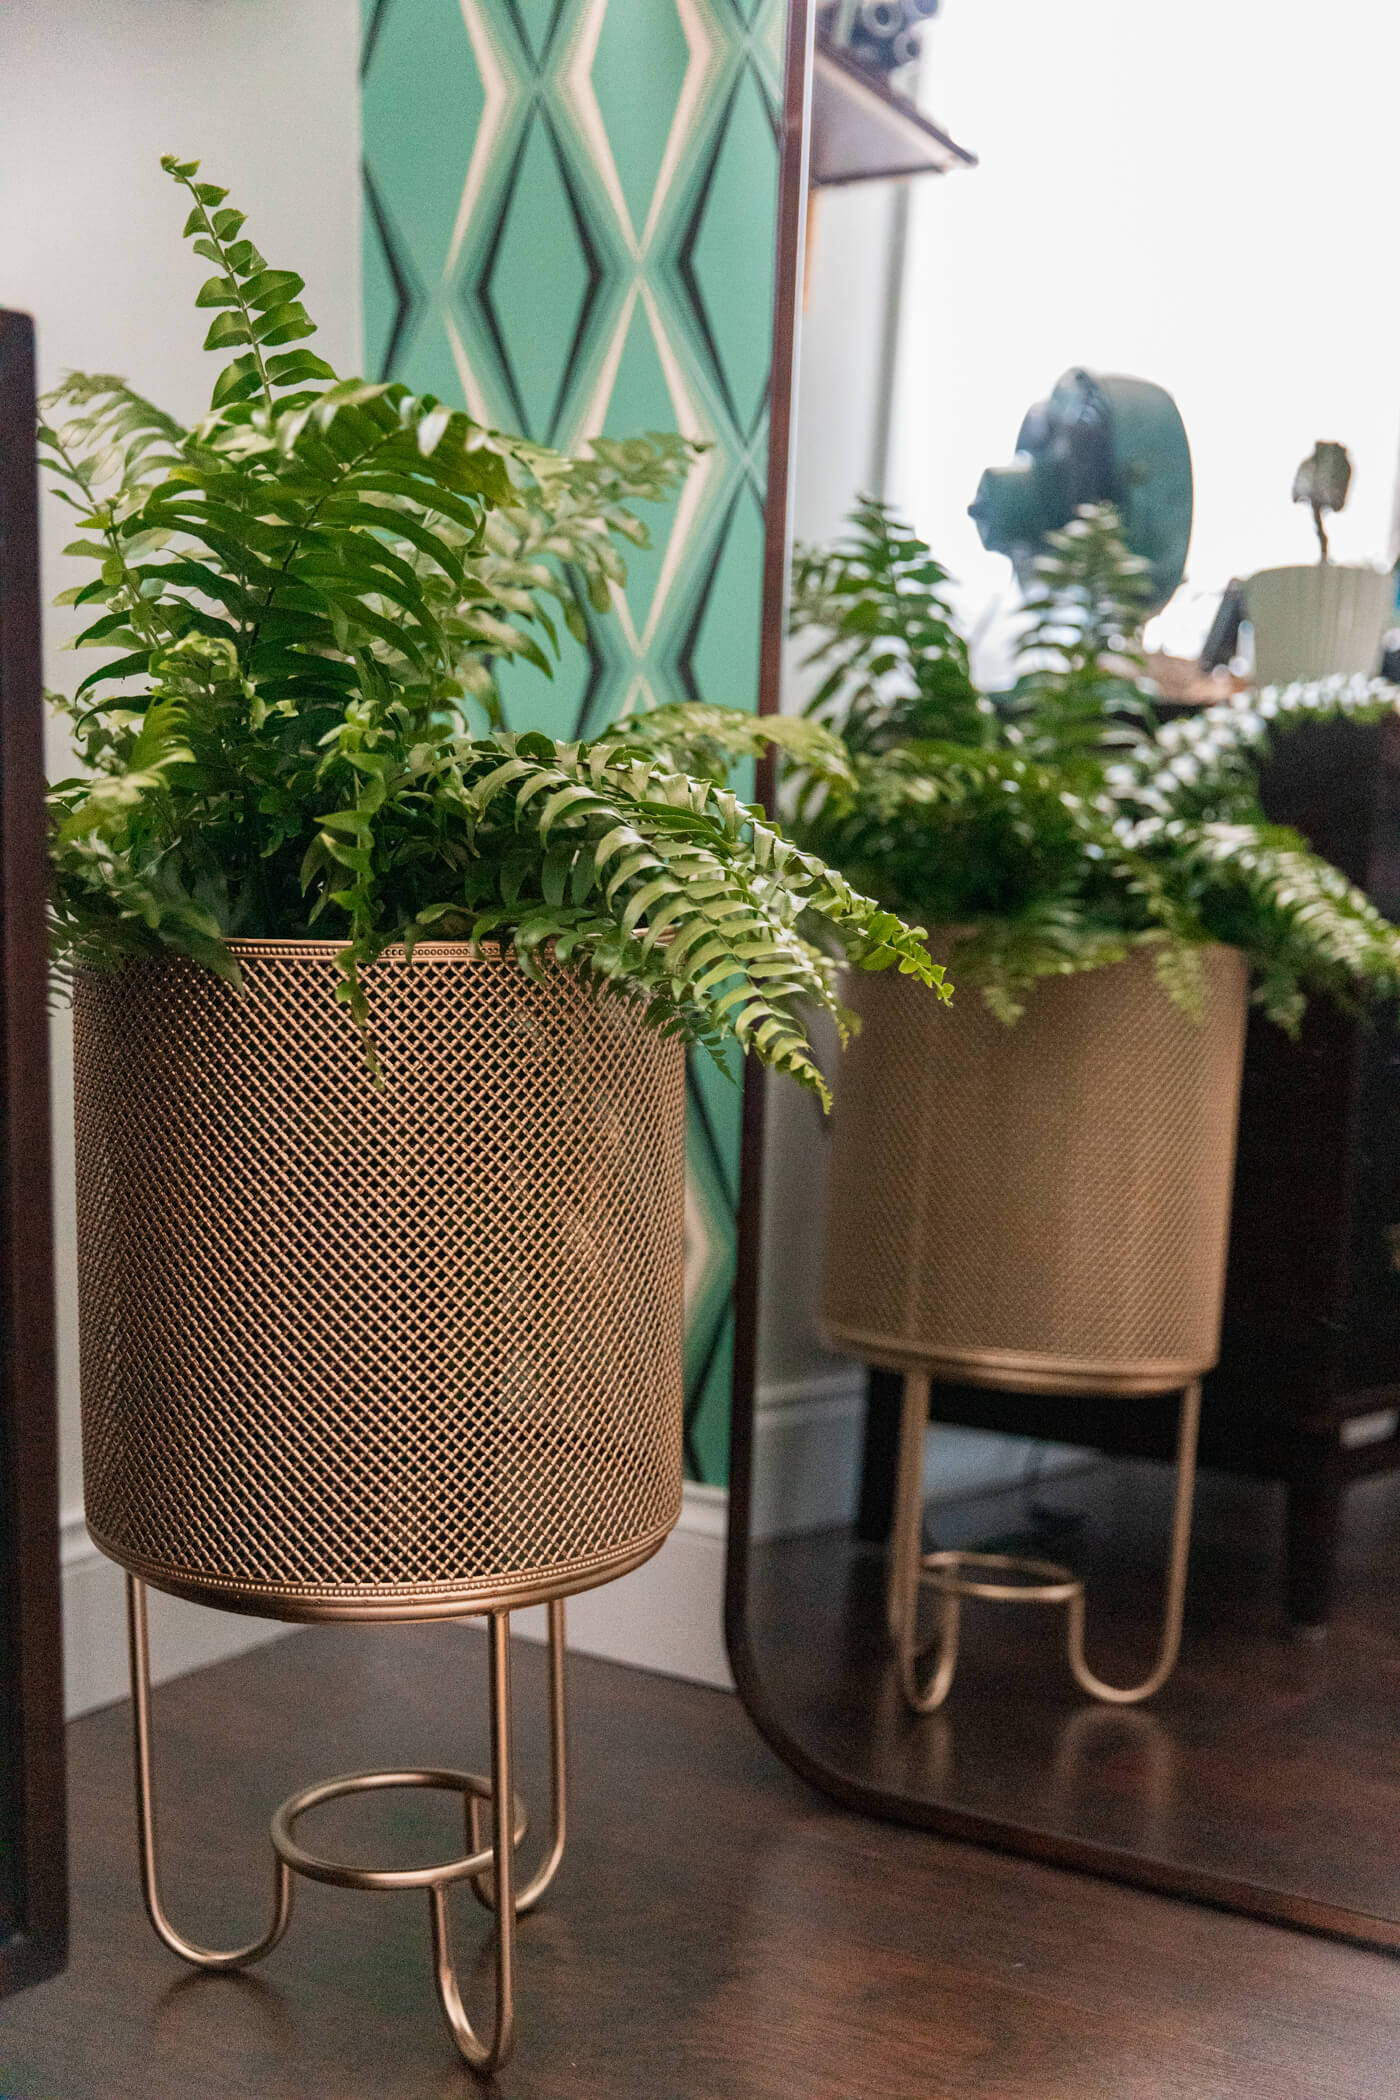 fern in a gold plant holder and a large mirron